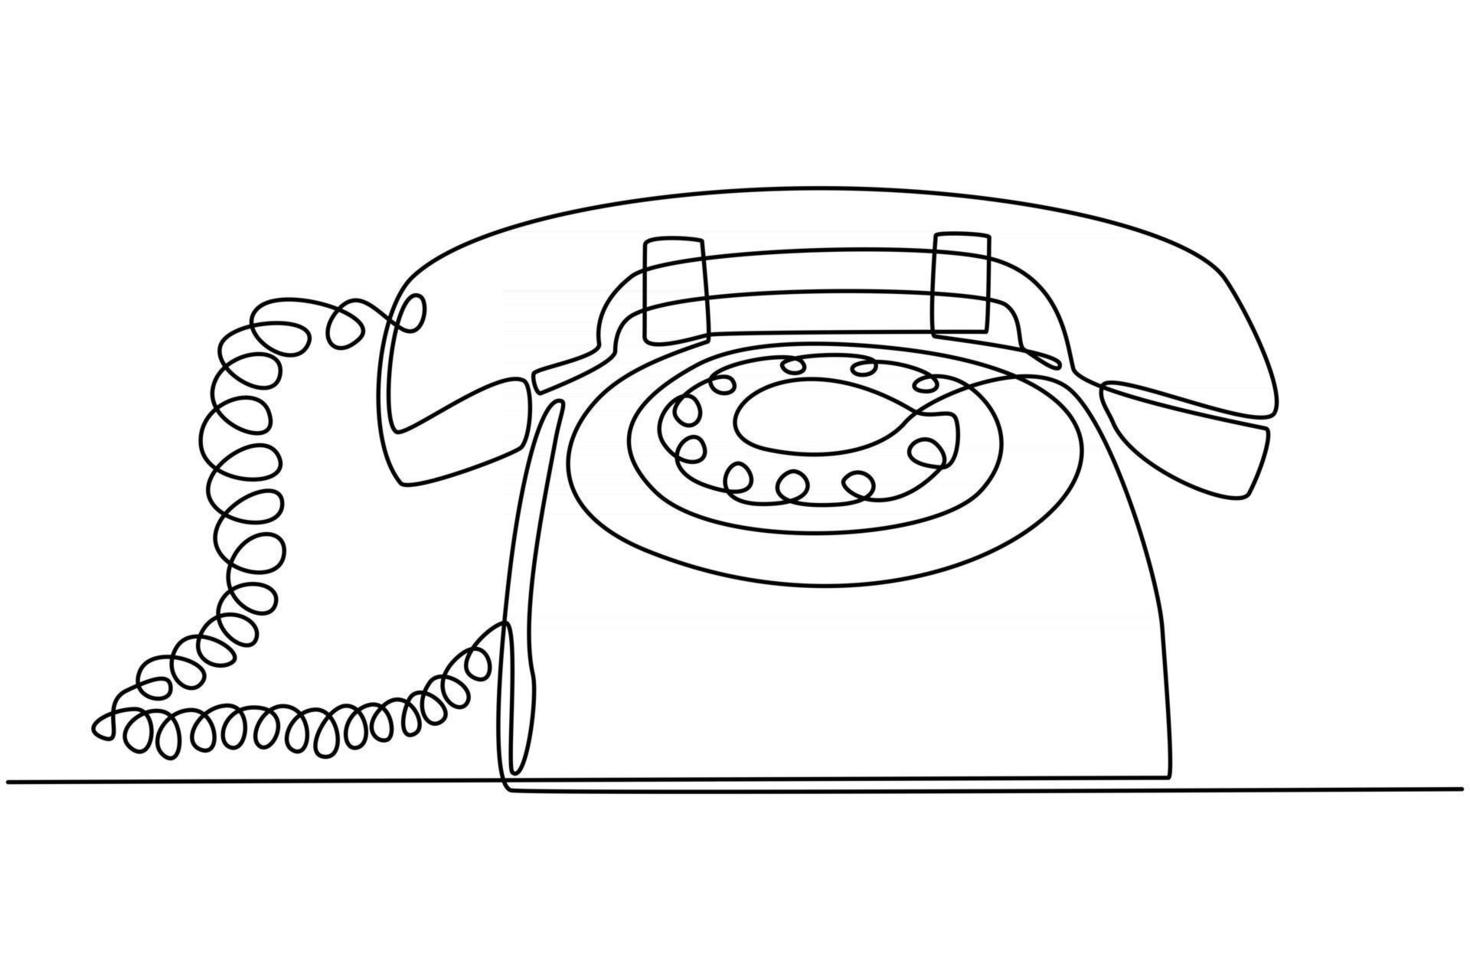 Vintage rotary dial telephone colored sketch - Stock Illustration  [25258494] - PIXTA